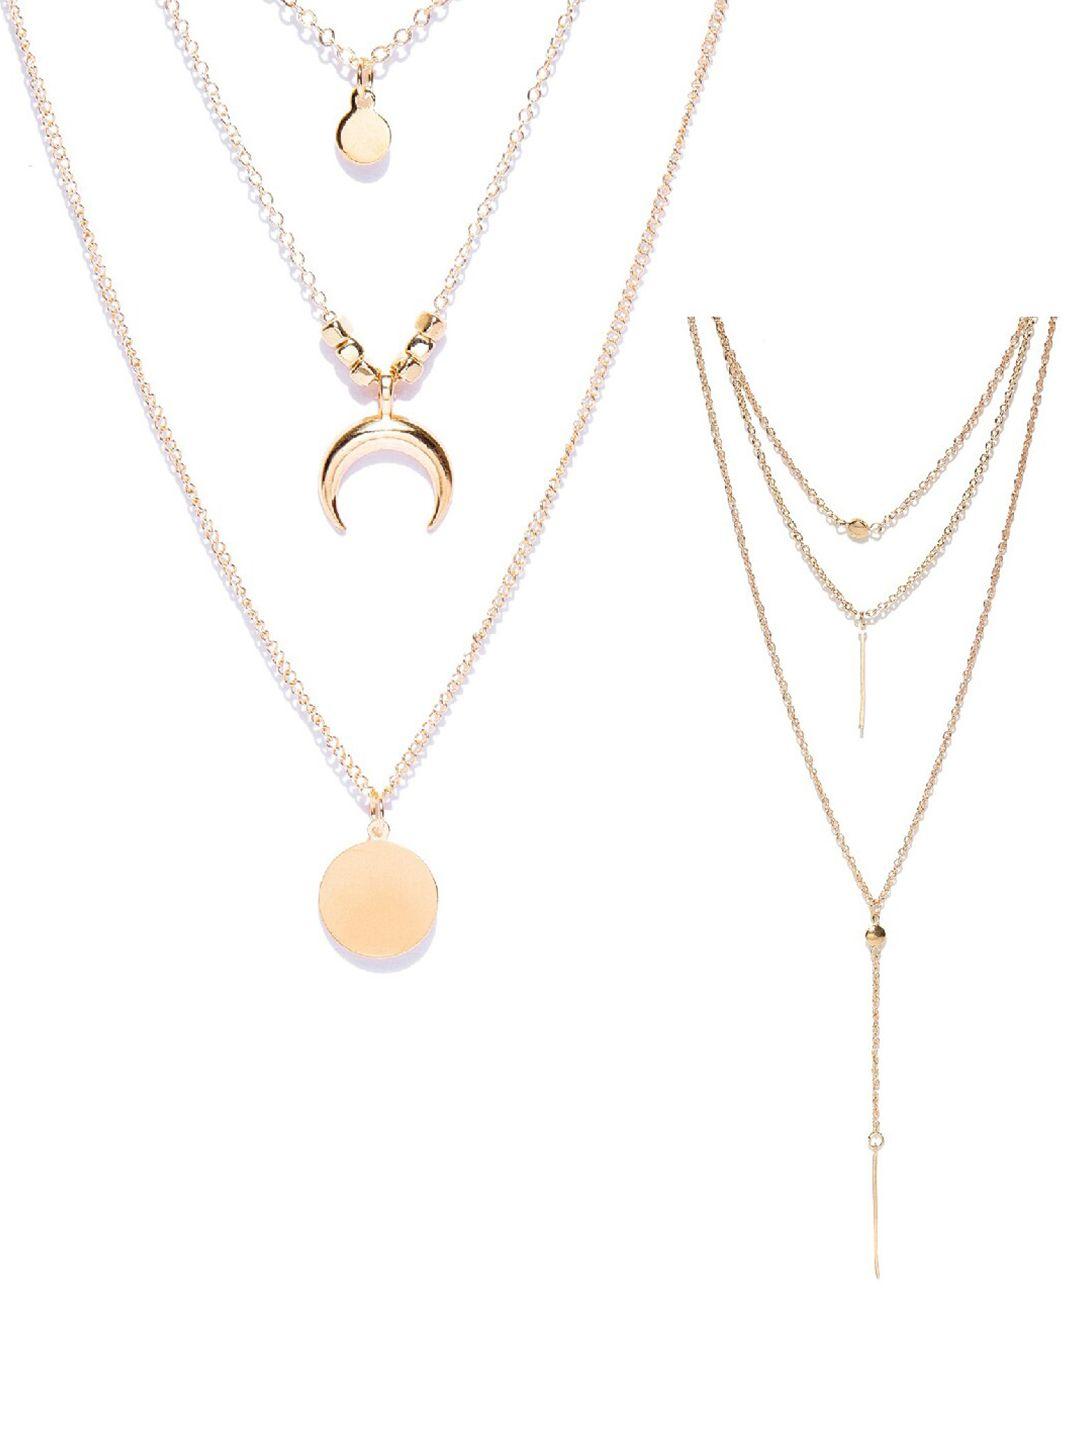 oomph set of 2 gold-toned layered necklace